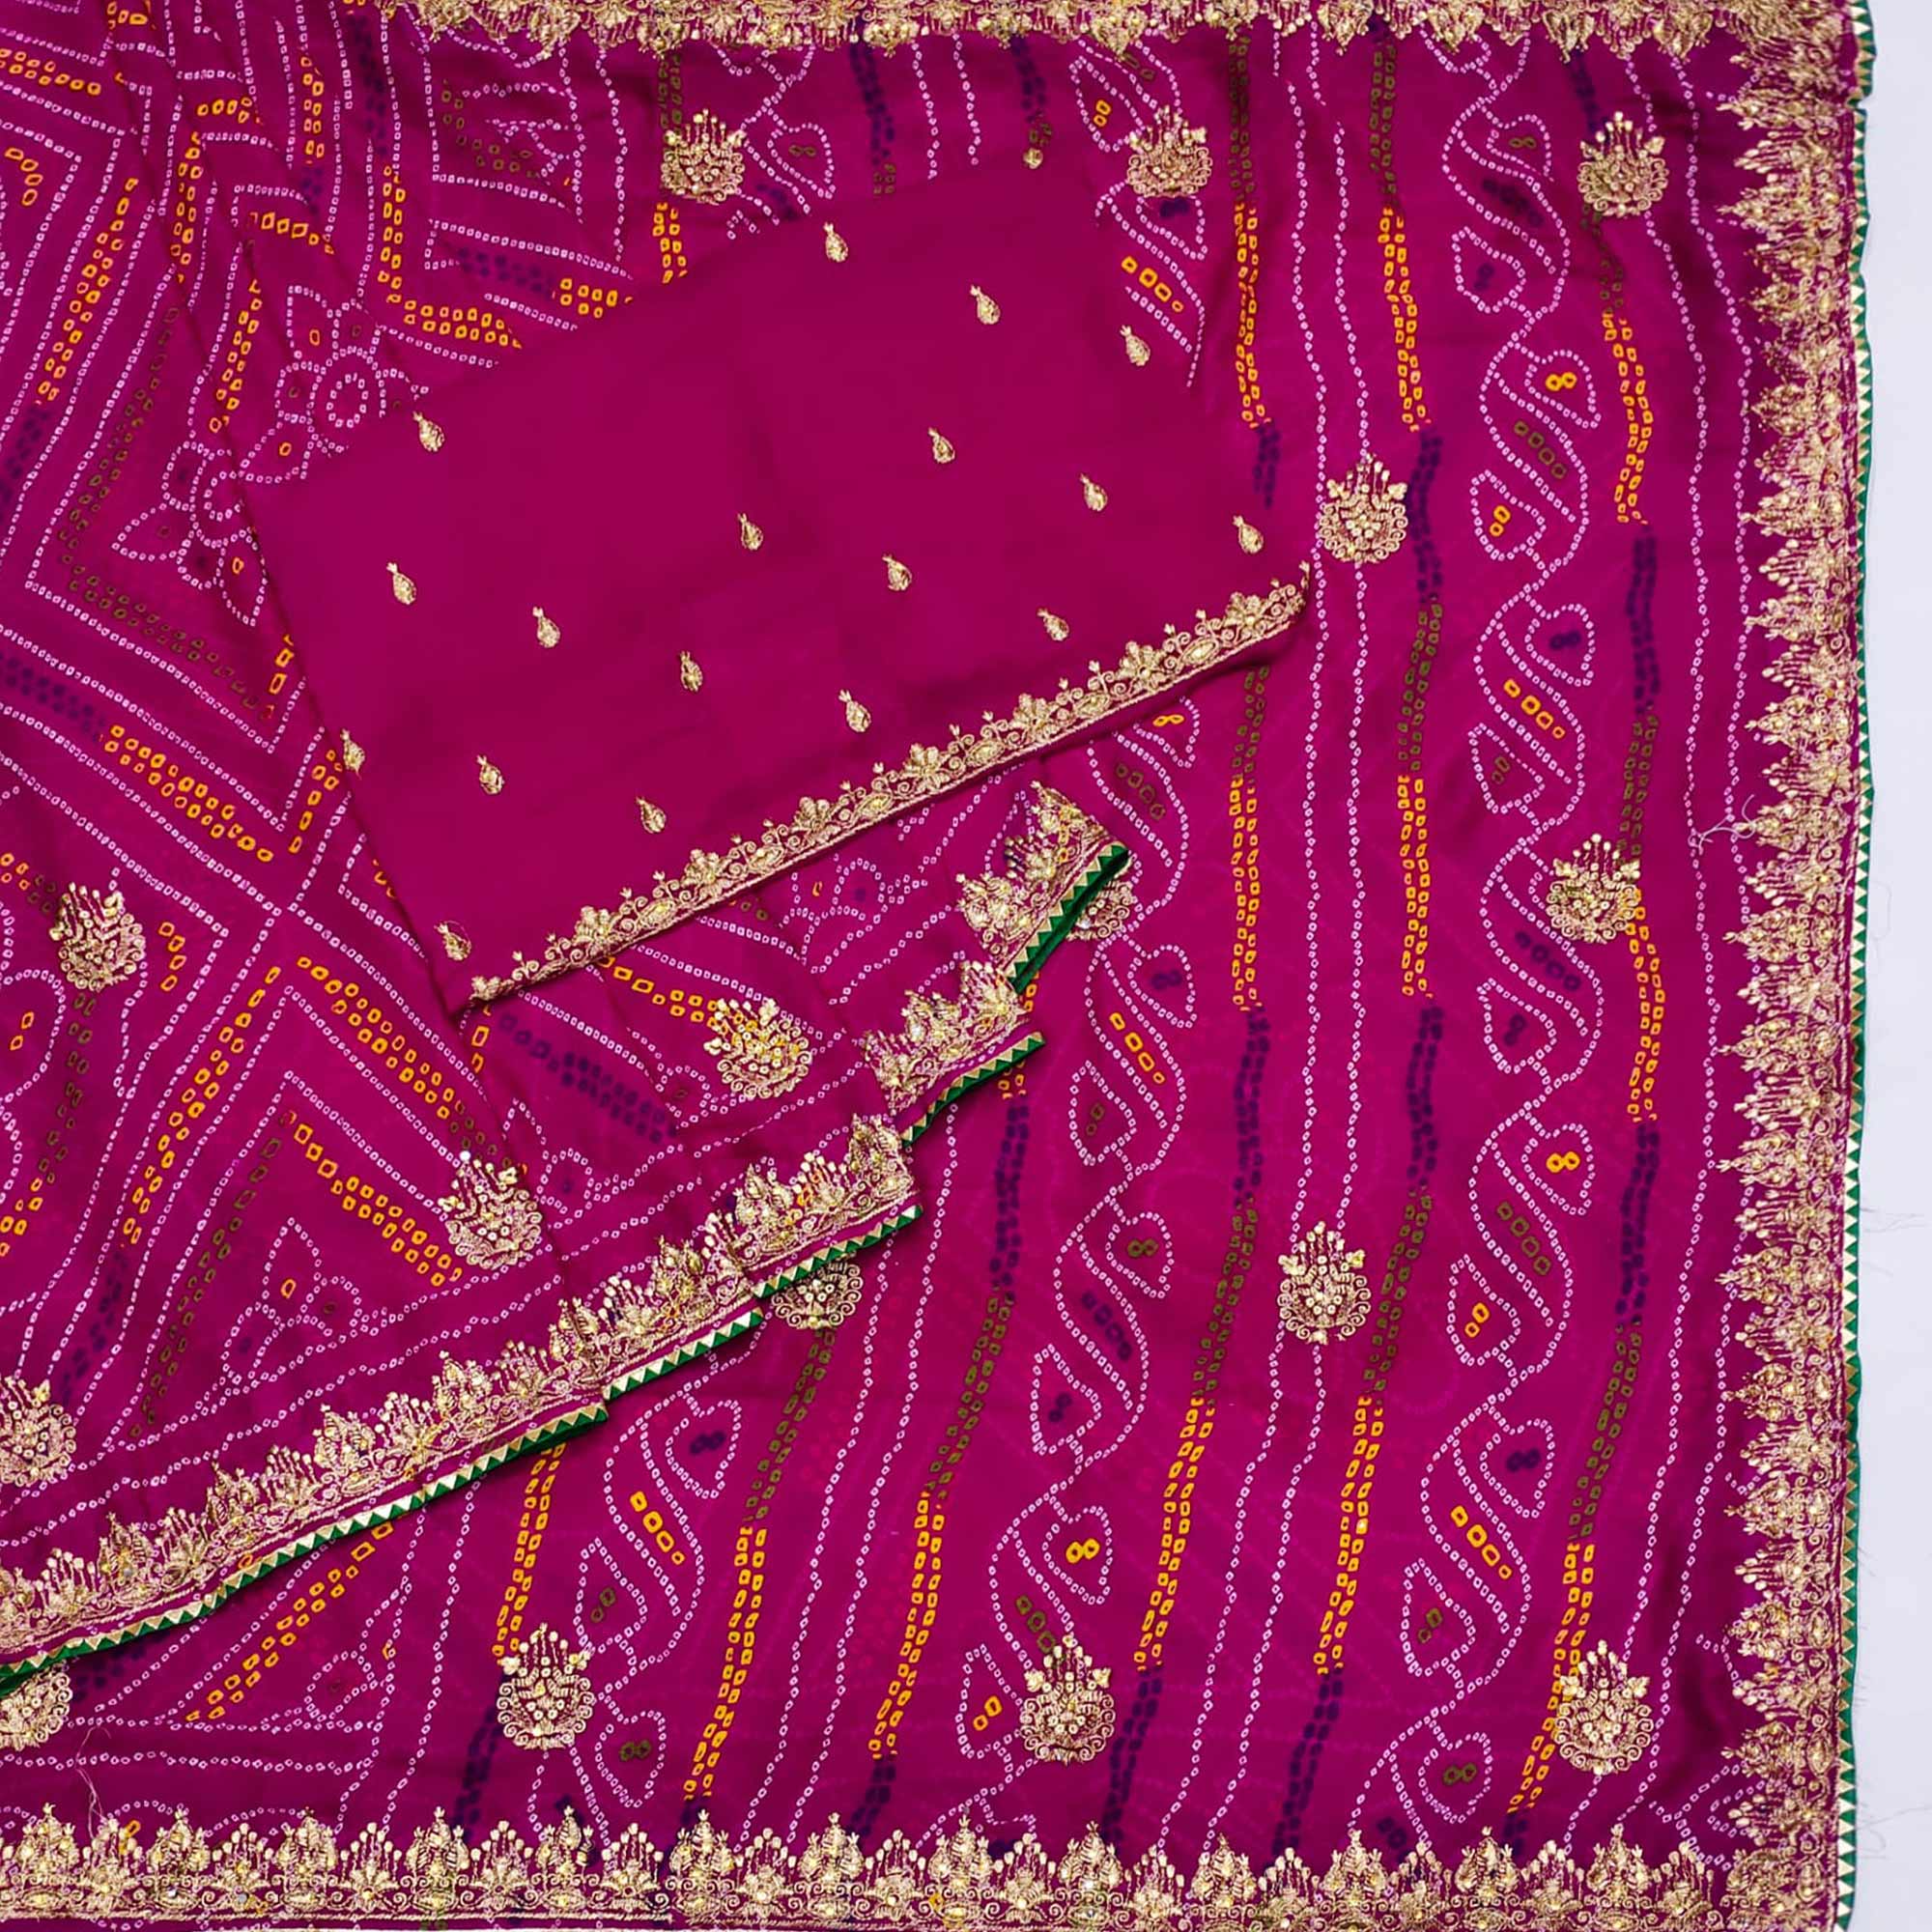 Rani Pink Embroidered With Bandhani Printed Georgette Saree